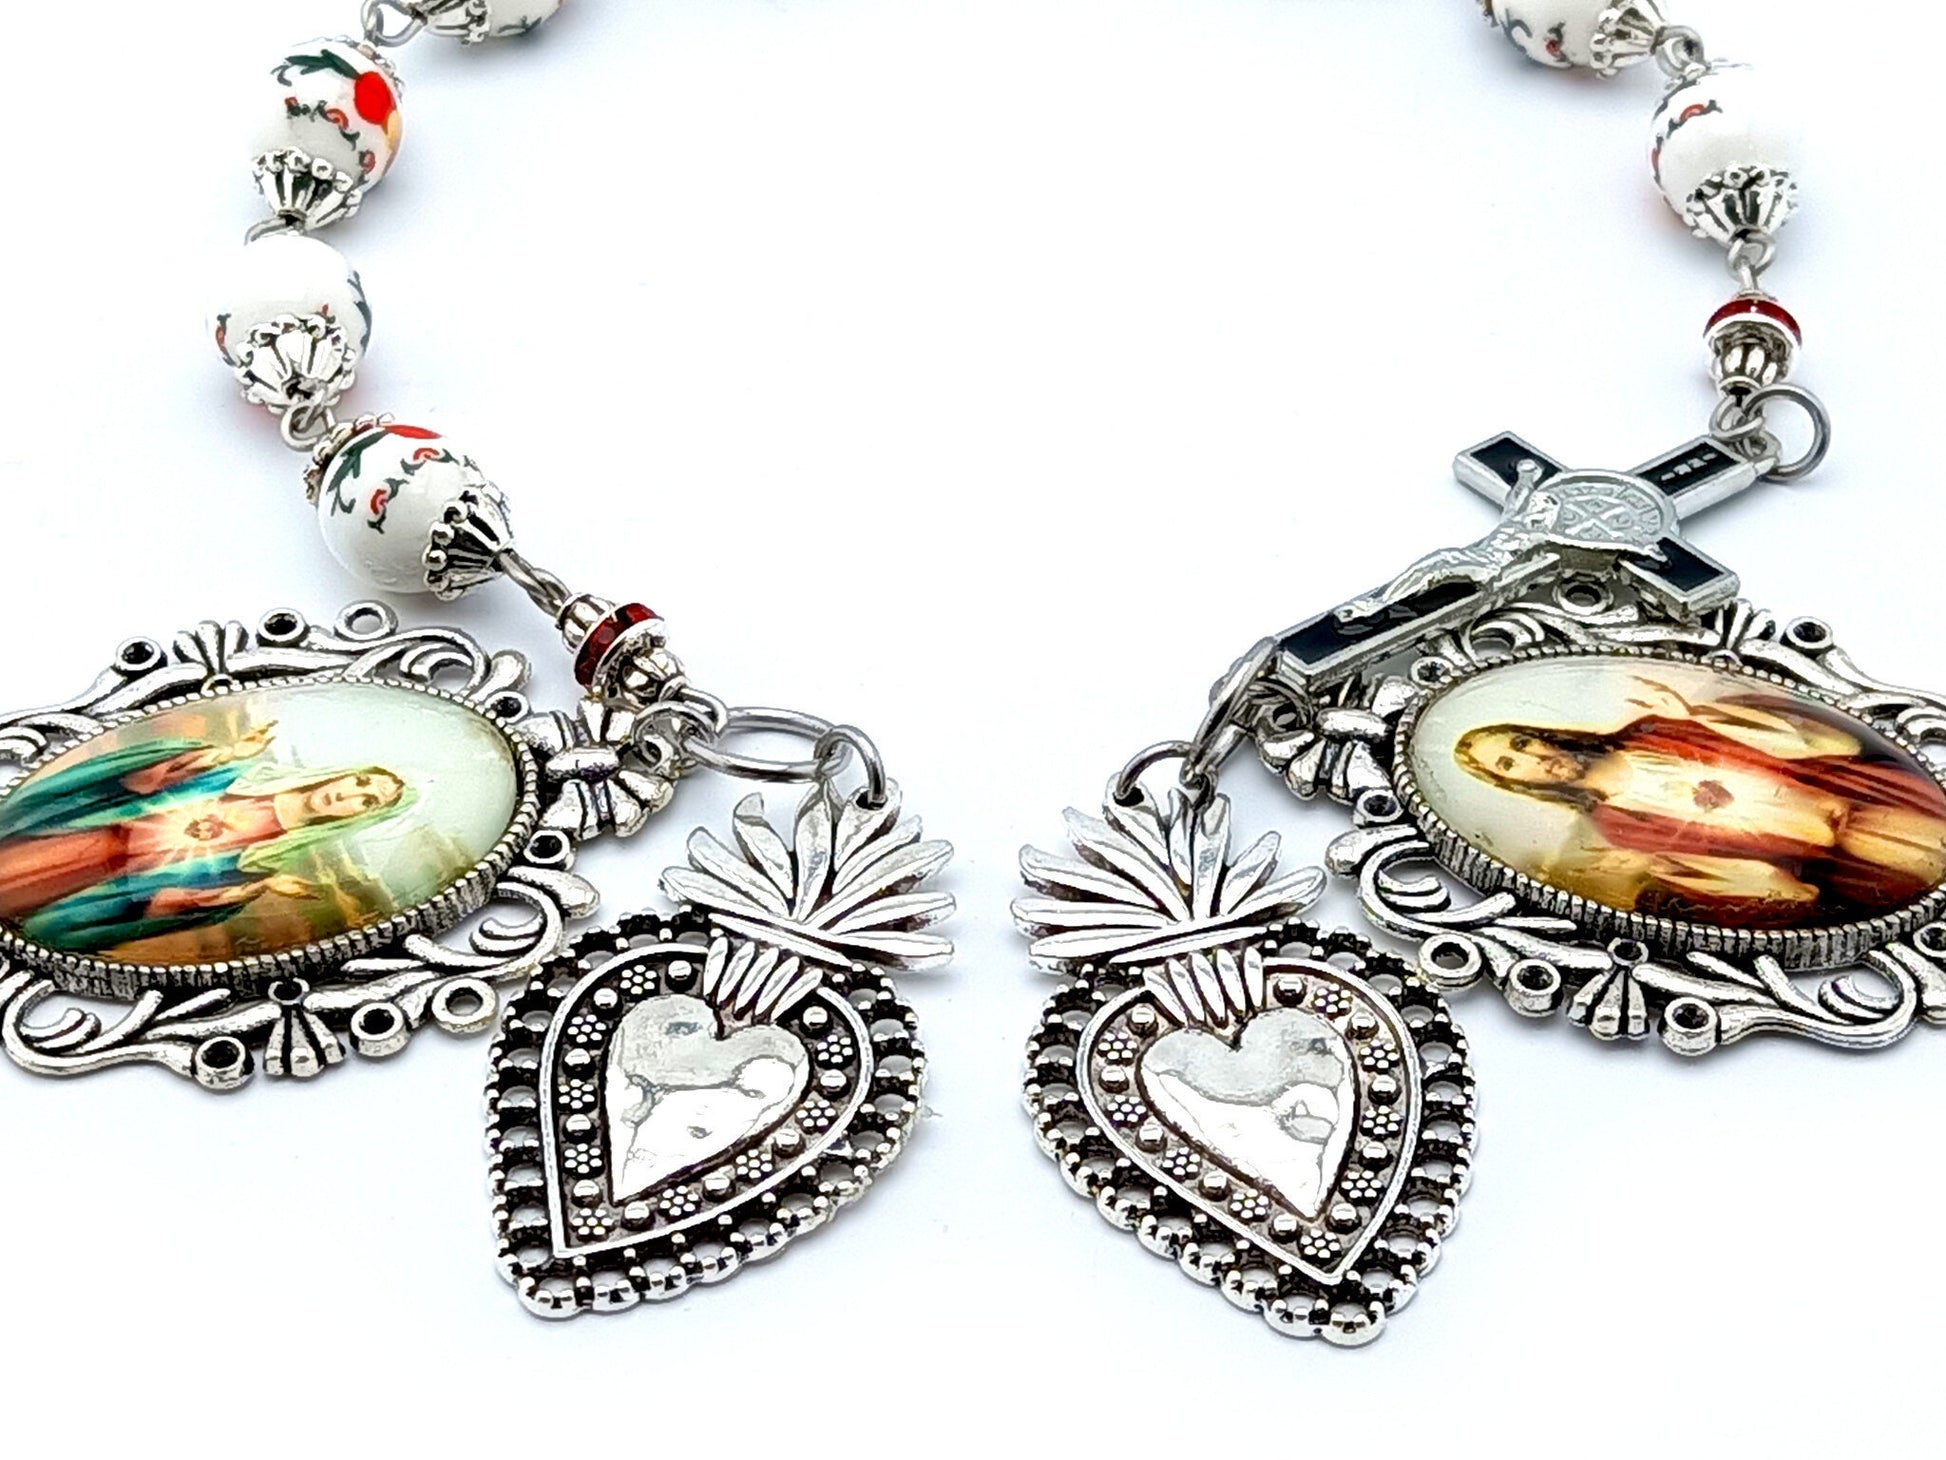 Sacred Heart of Jesus and Immaculate Heart of Mary unique rosary beads prayer chaplet with porcleain beads, silver heart medals and large picture medal.